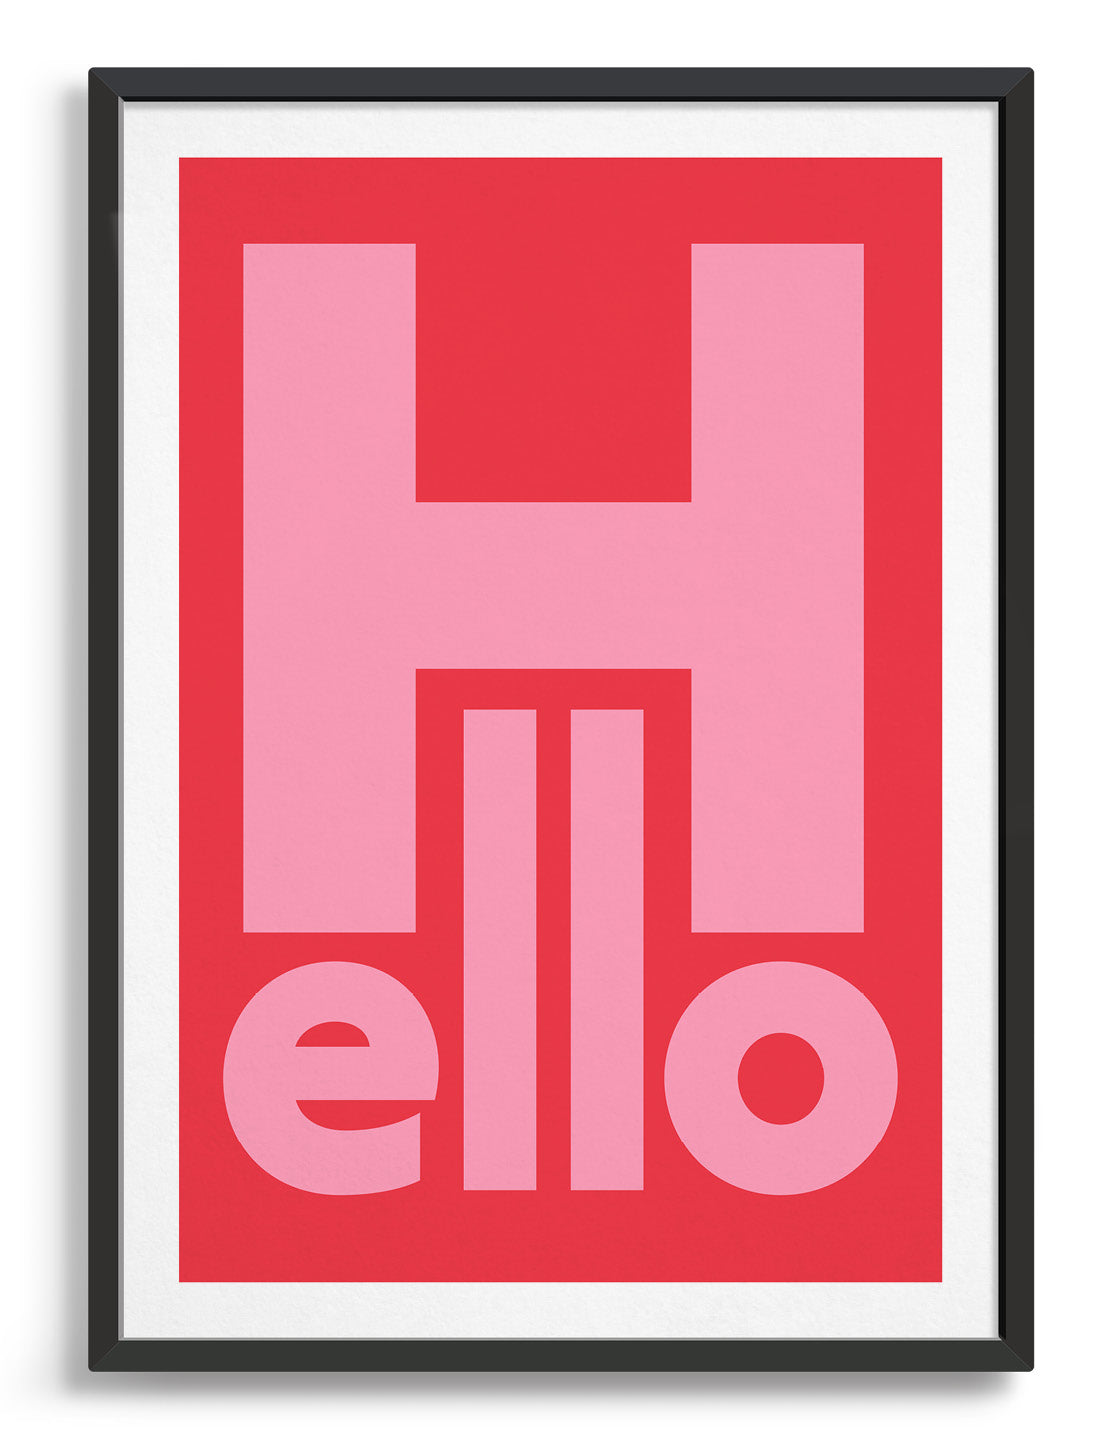 typography print with the word hello in pink bold type against a red background